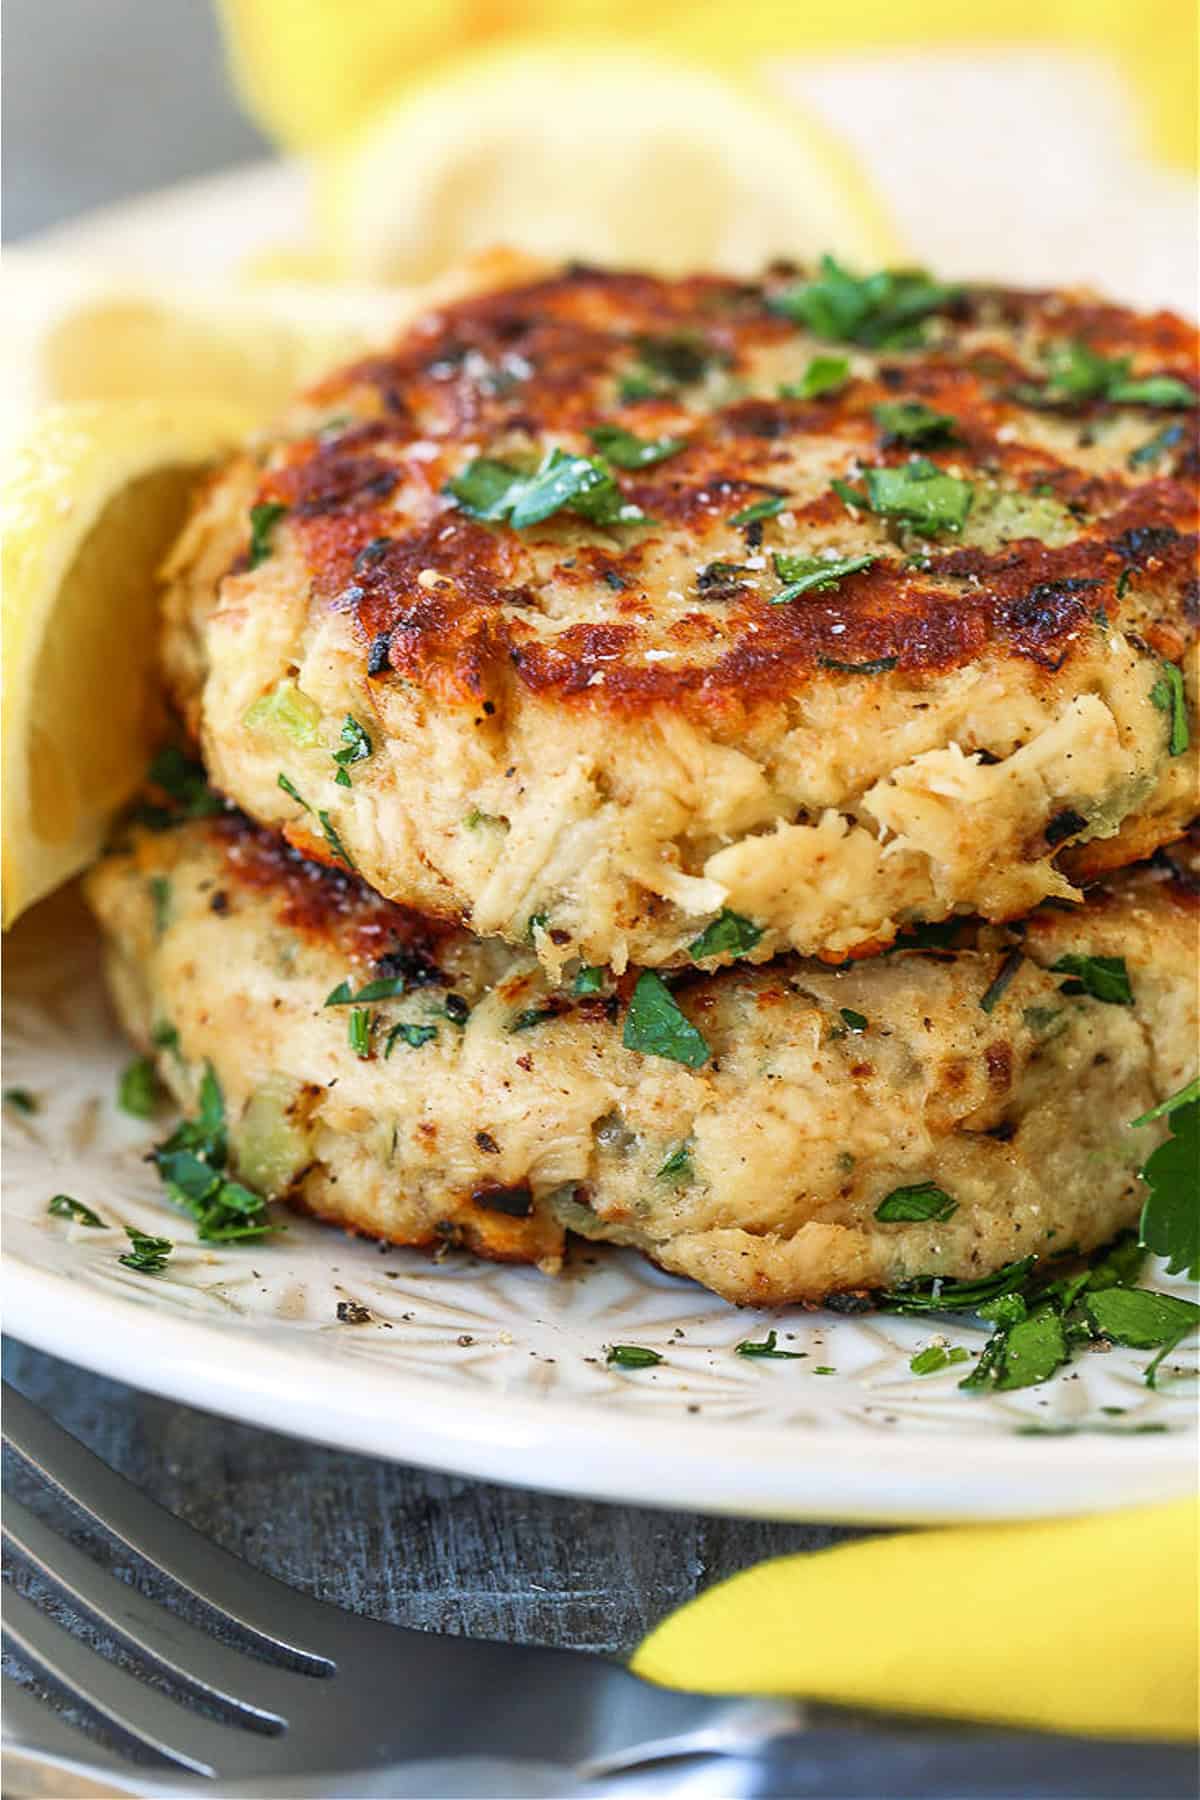 stacked tuna cakes on plate with yellow napkin